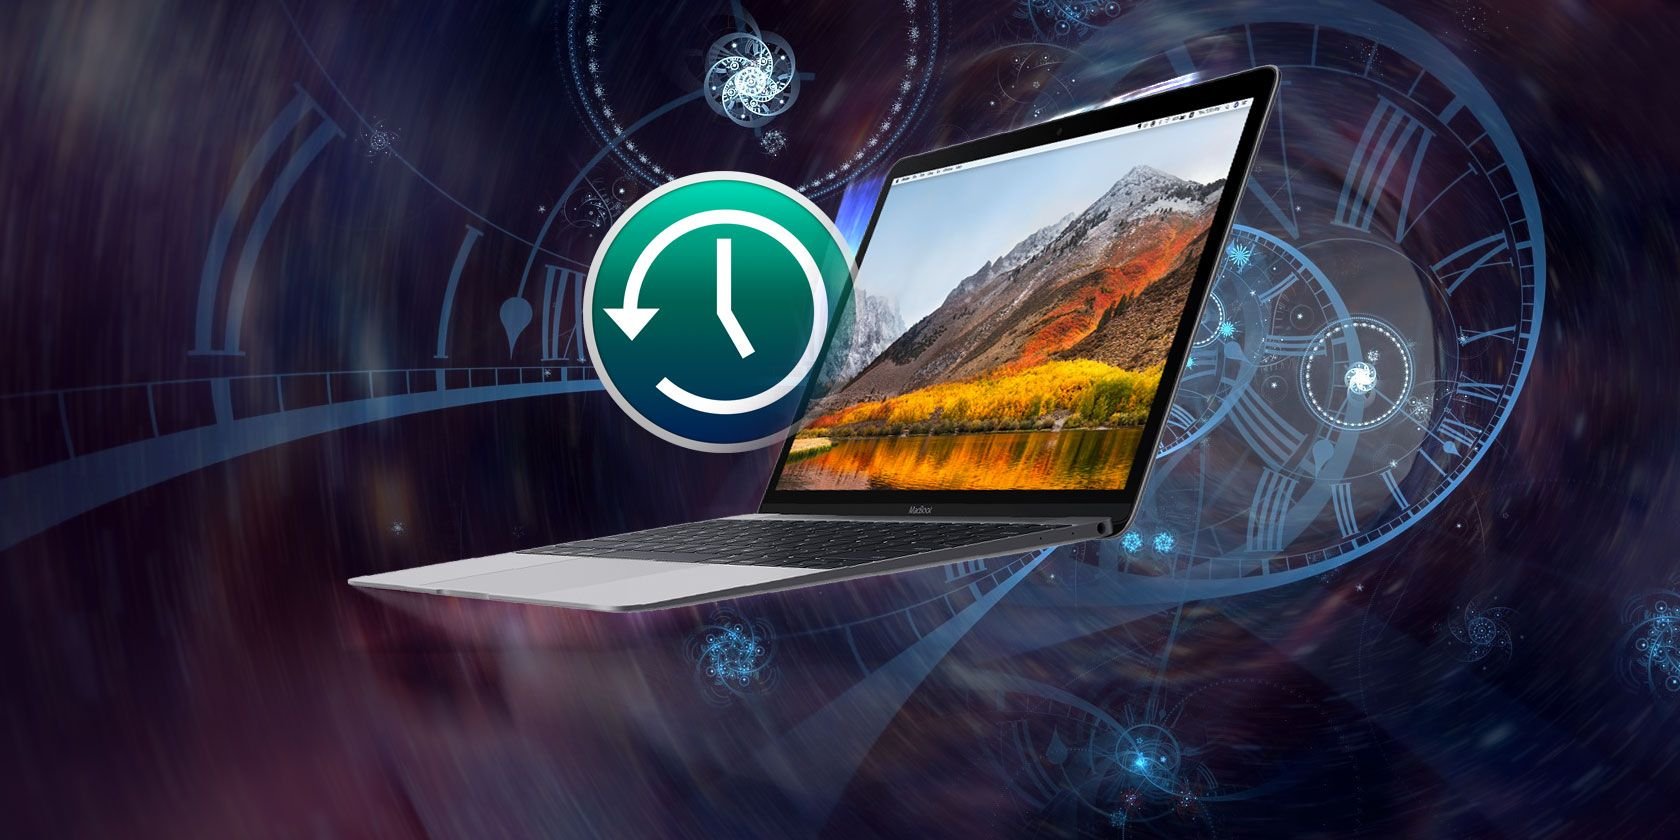 How to Use Time Machine to Back Up Your Mac